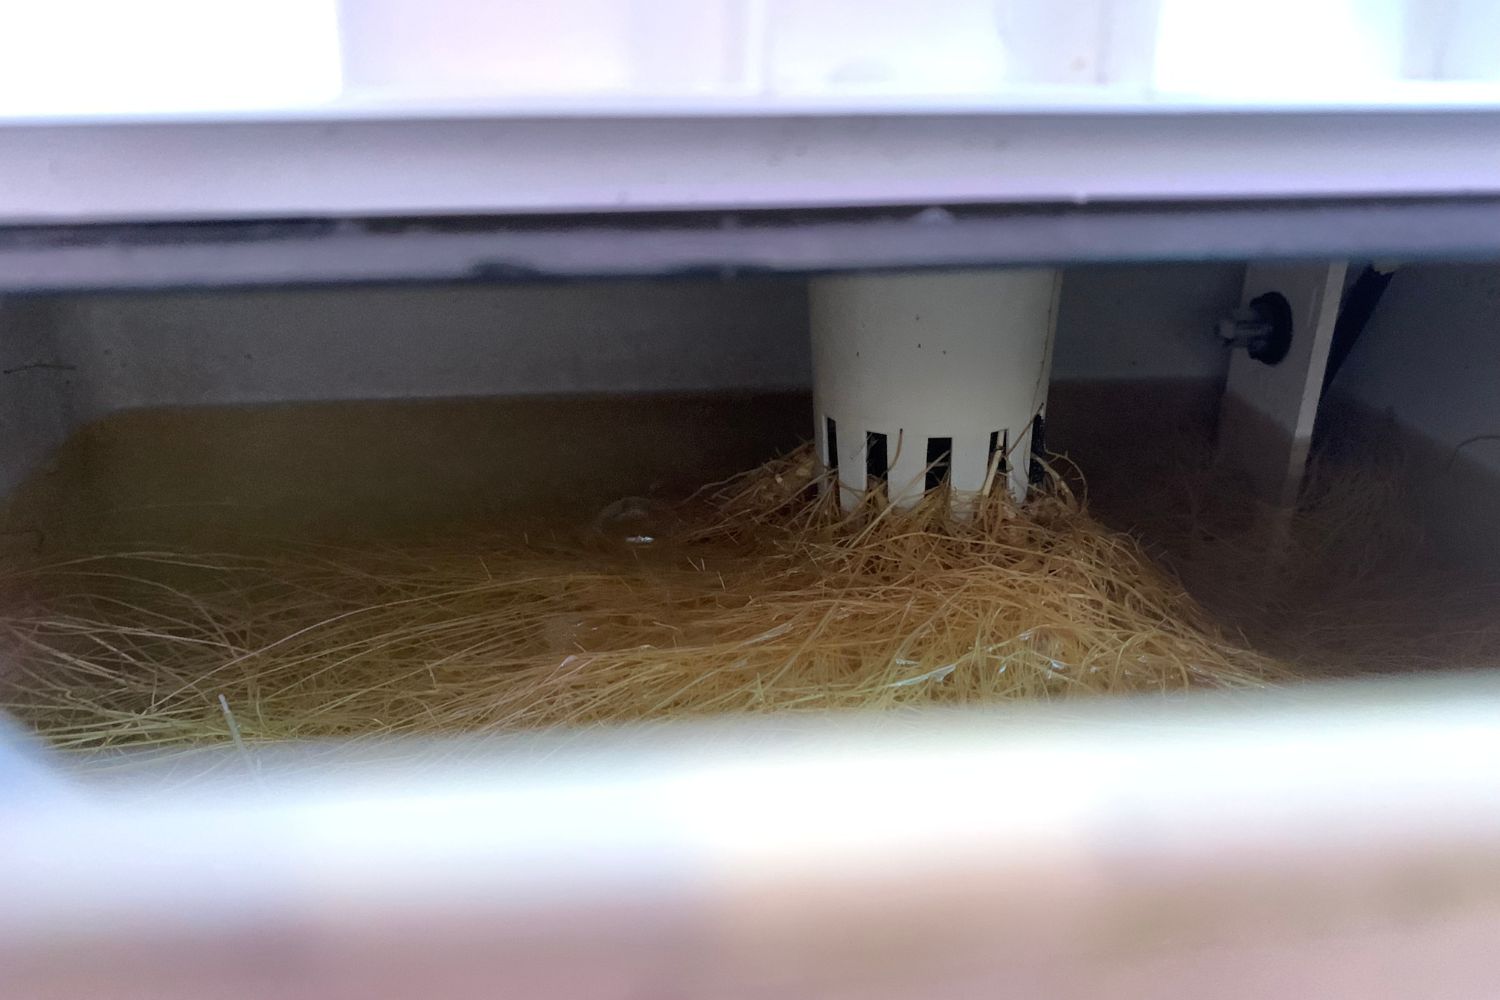 The water tank of the HeyAbby hydroponic grow box filled with long plant roots.